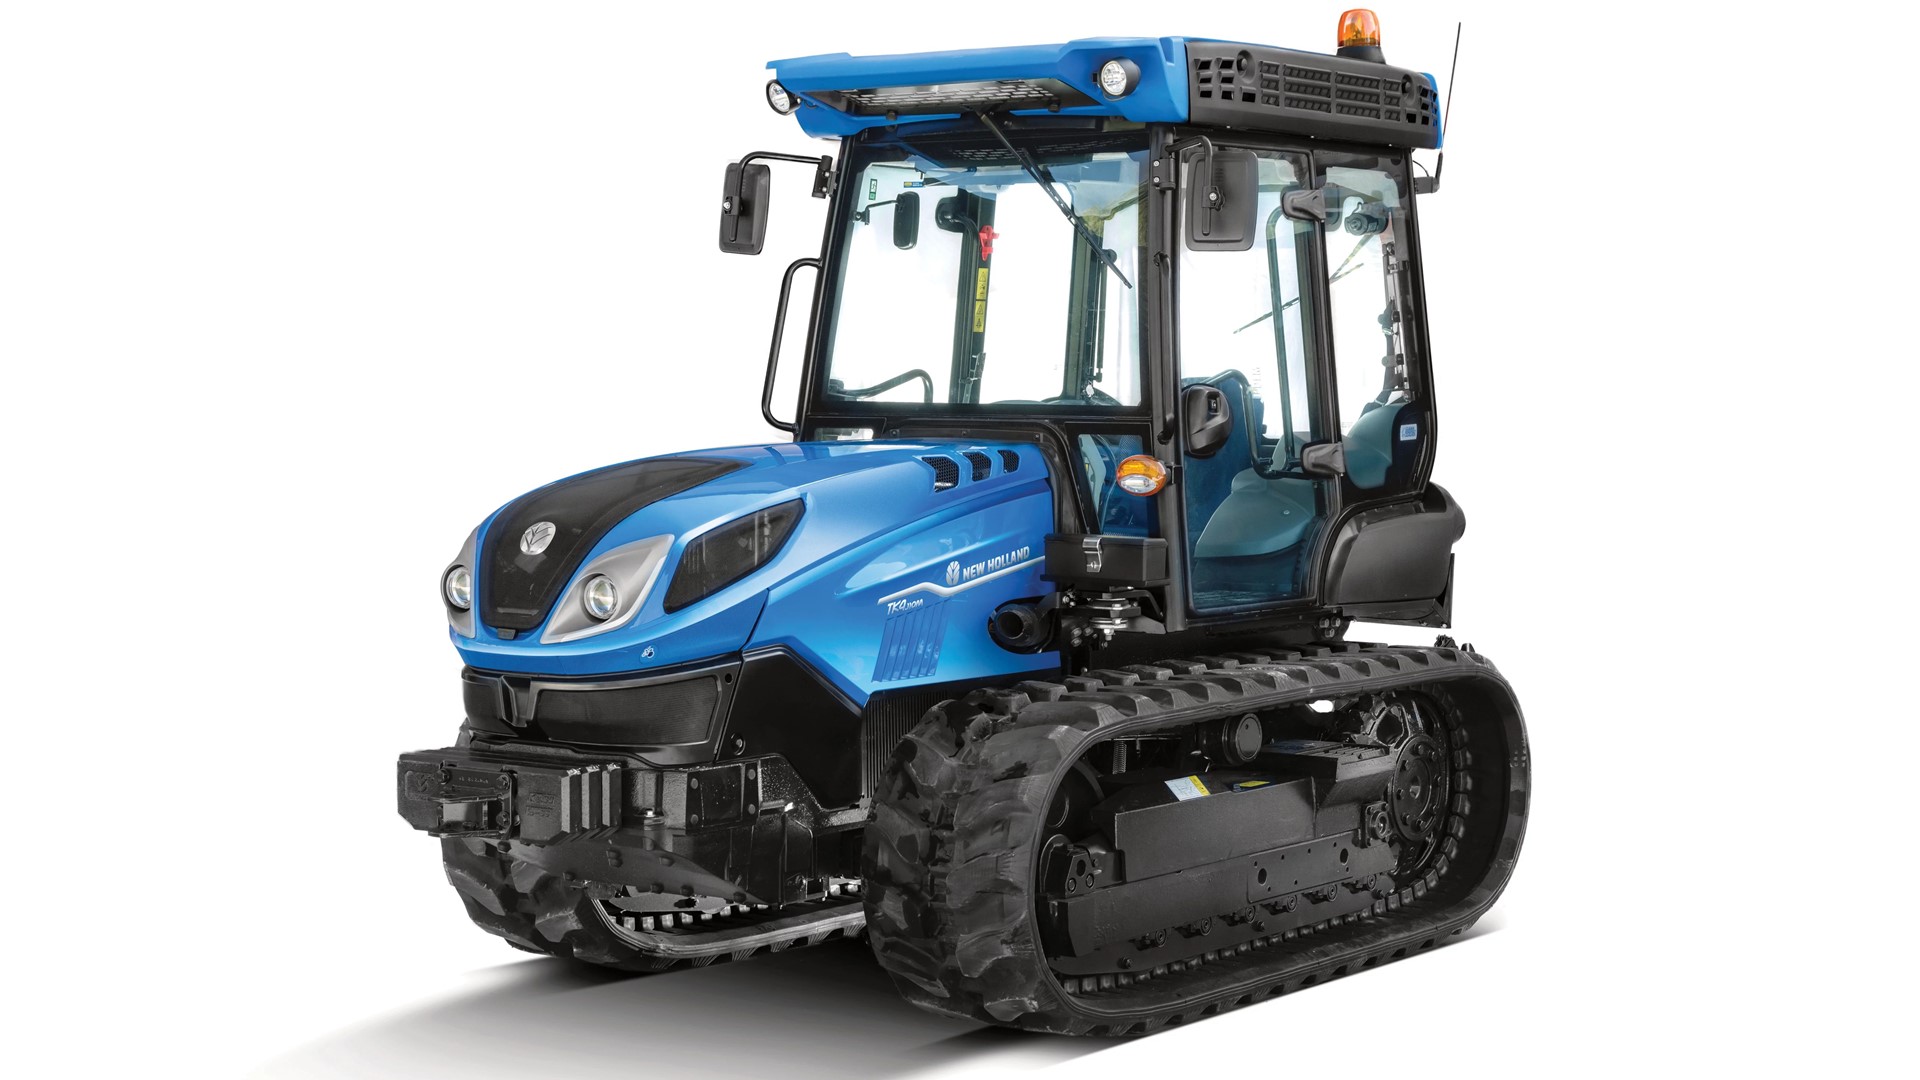 New Holland Agriculture Launching New Equipment and Highlighting